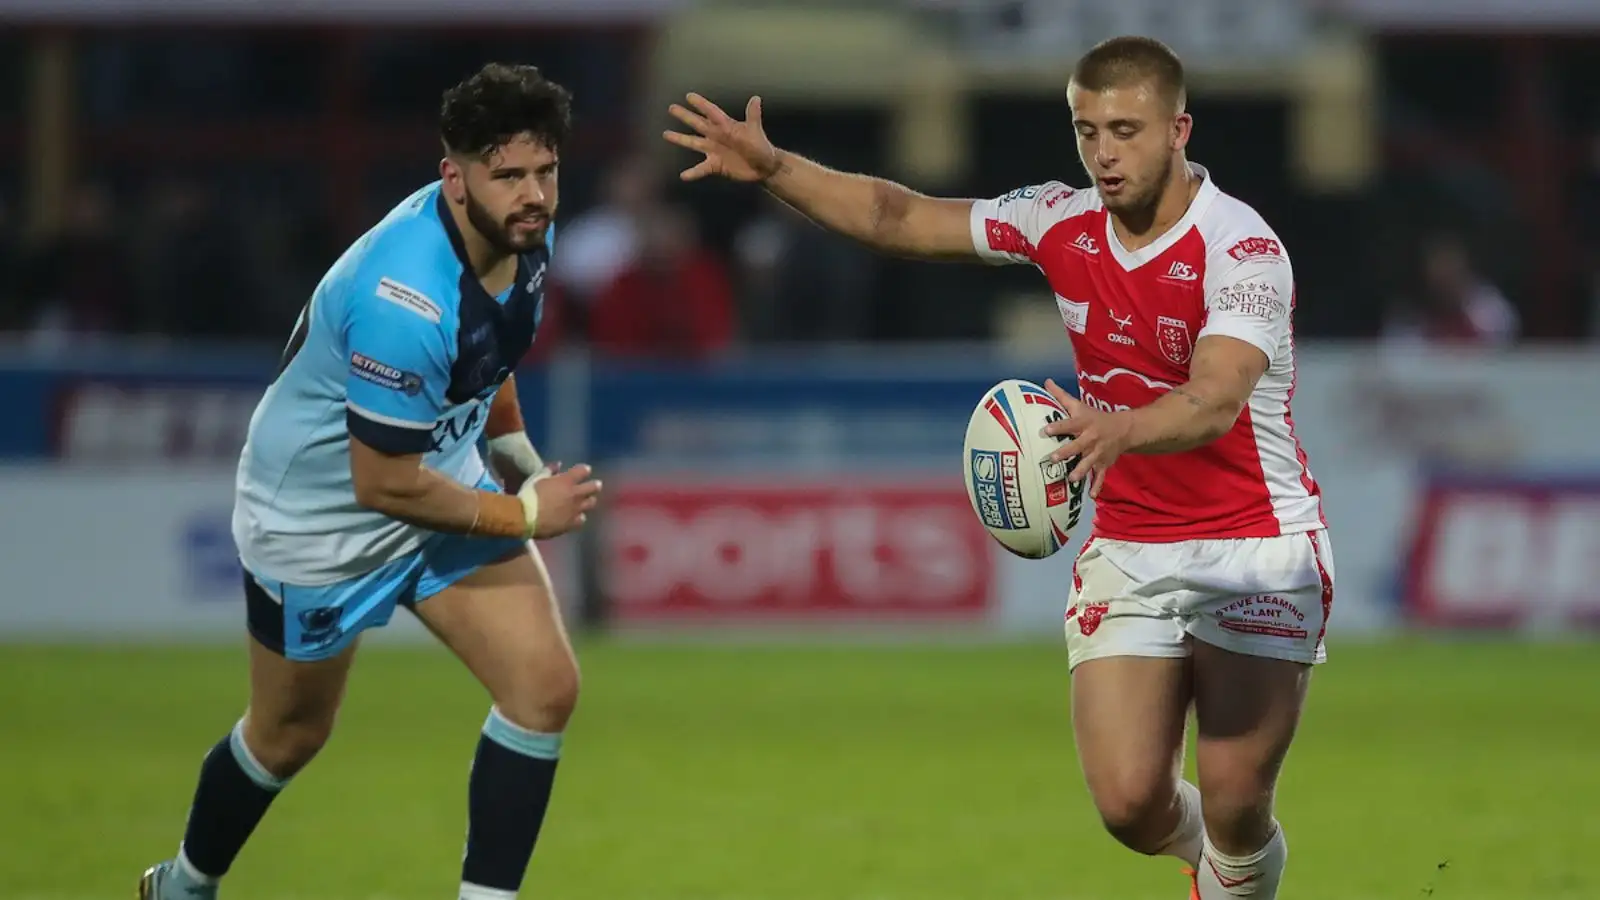 Hull KR ‘professional performance’ praised after reaching Challenge Cup quarter-finals